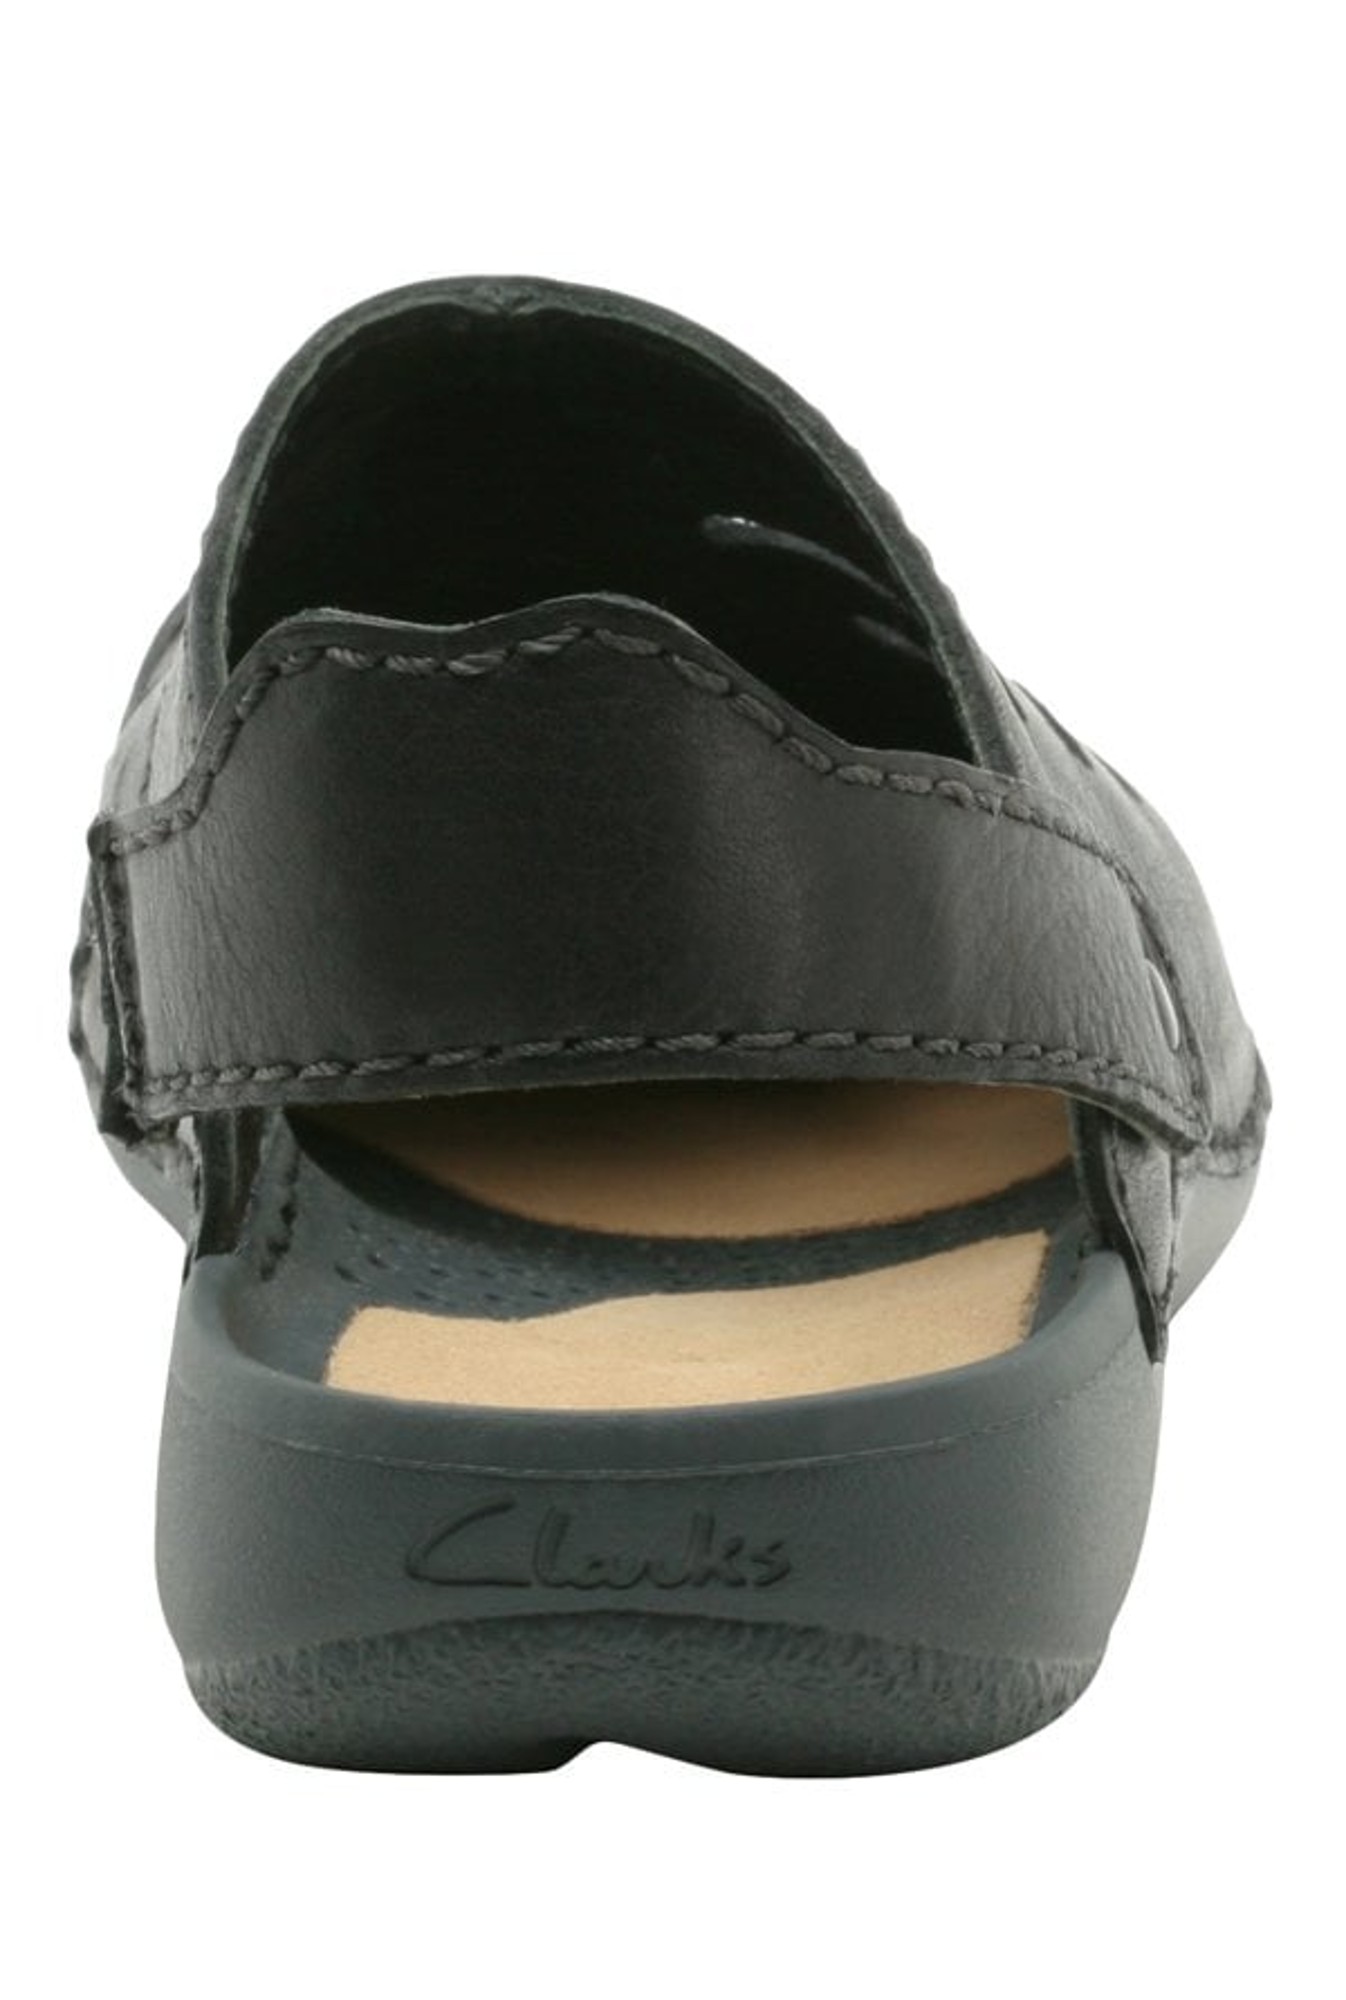 clarks men's wild vibe leather sandals and floaters